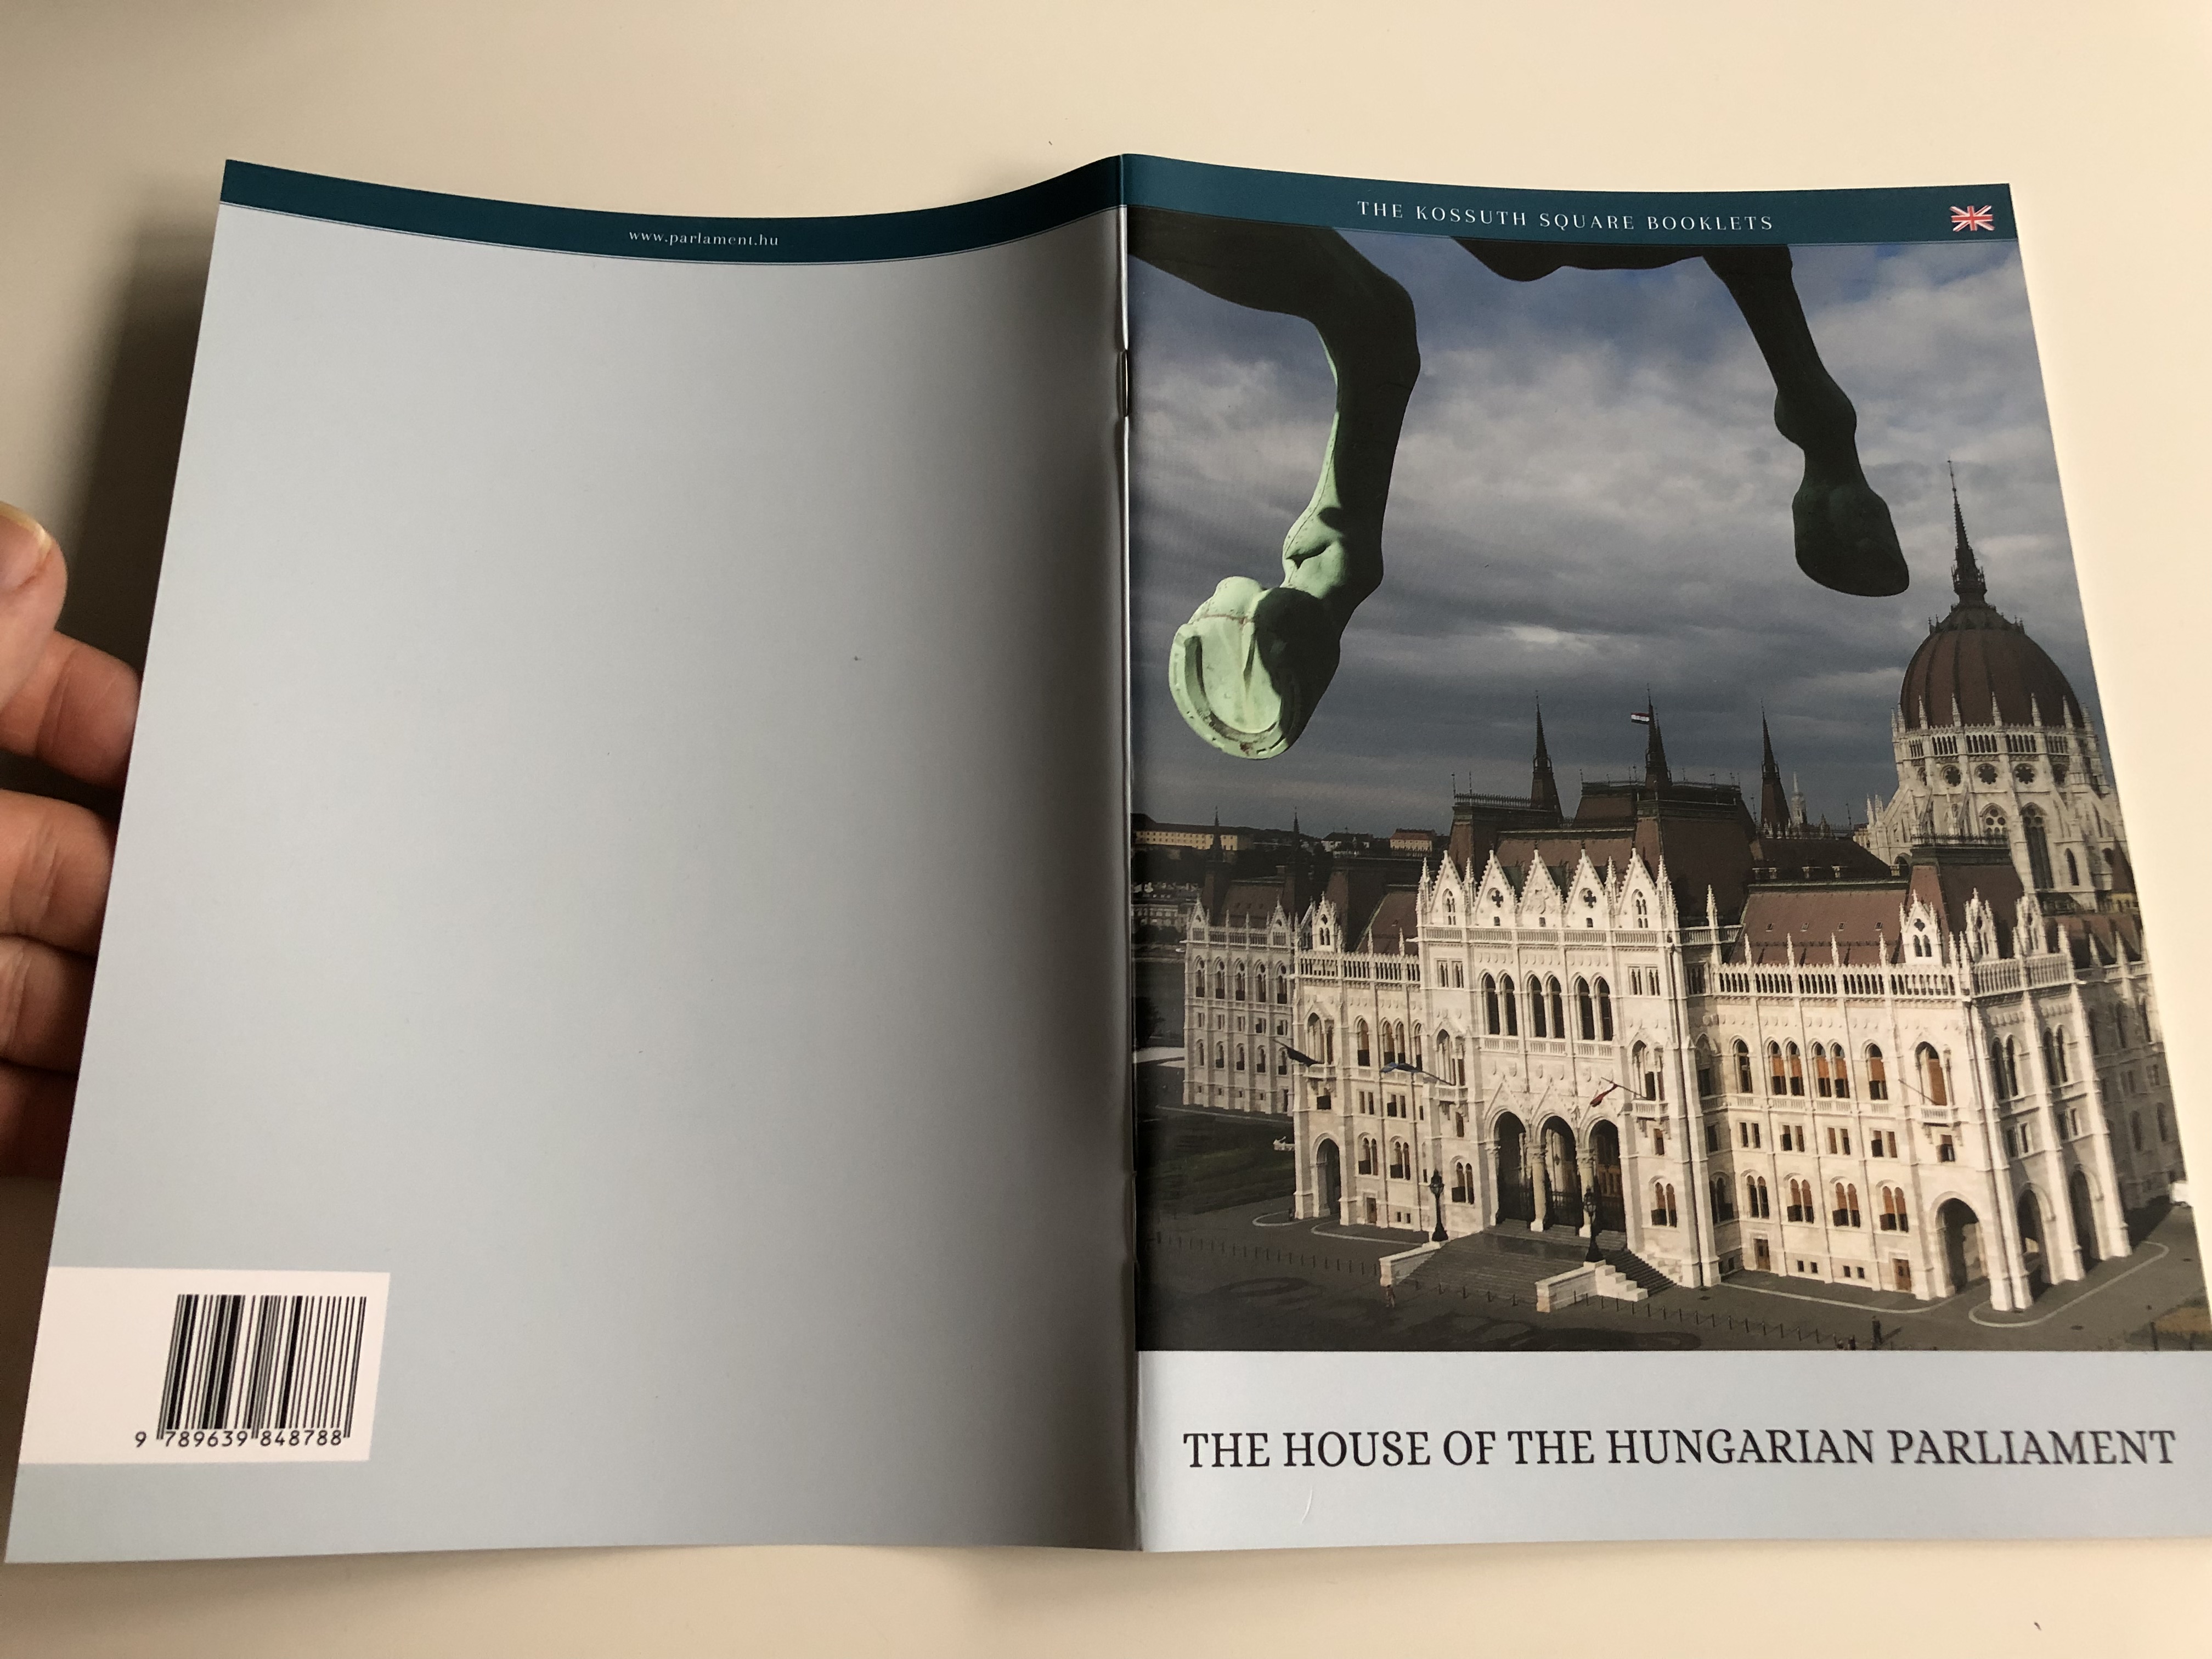 the-house-of-the-hungarian-parliament-by-andr-s-t-r-k-the-kossuth-square-booklets-the-office-of-the-national-assembly-2016-15-.jpg